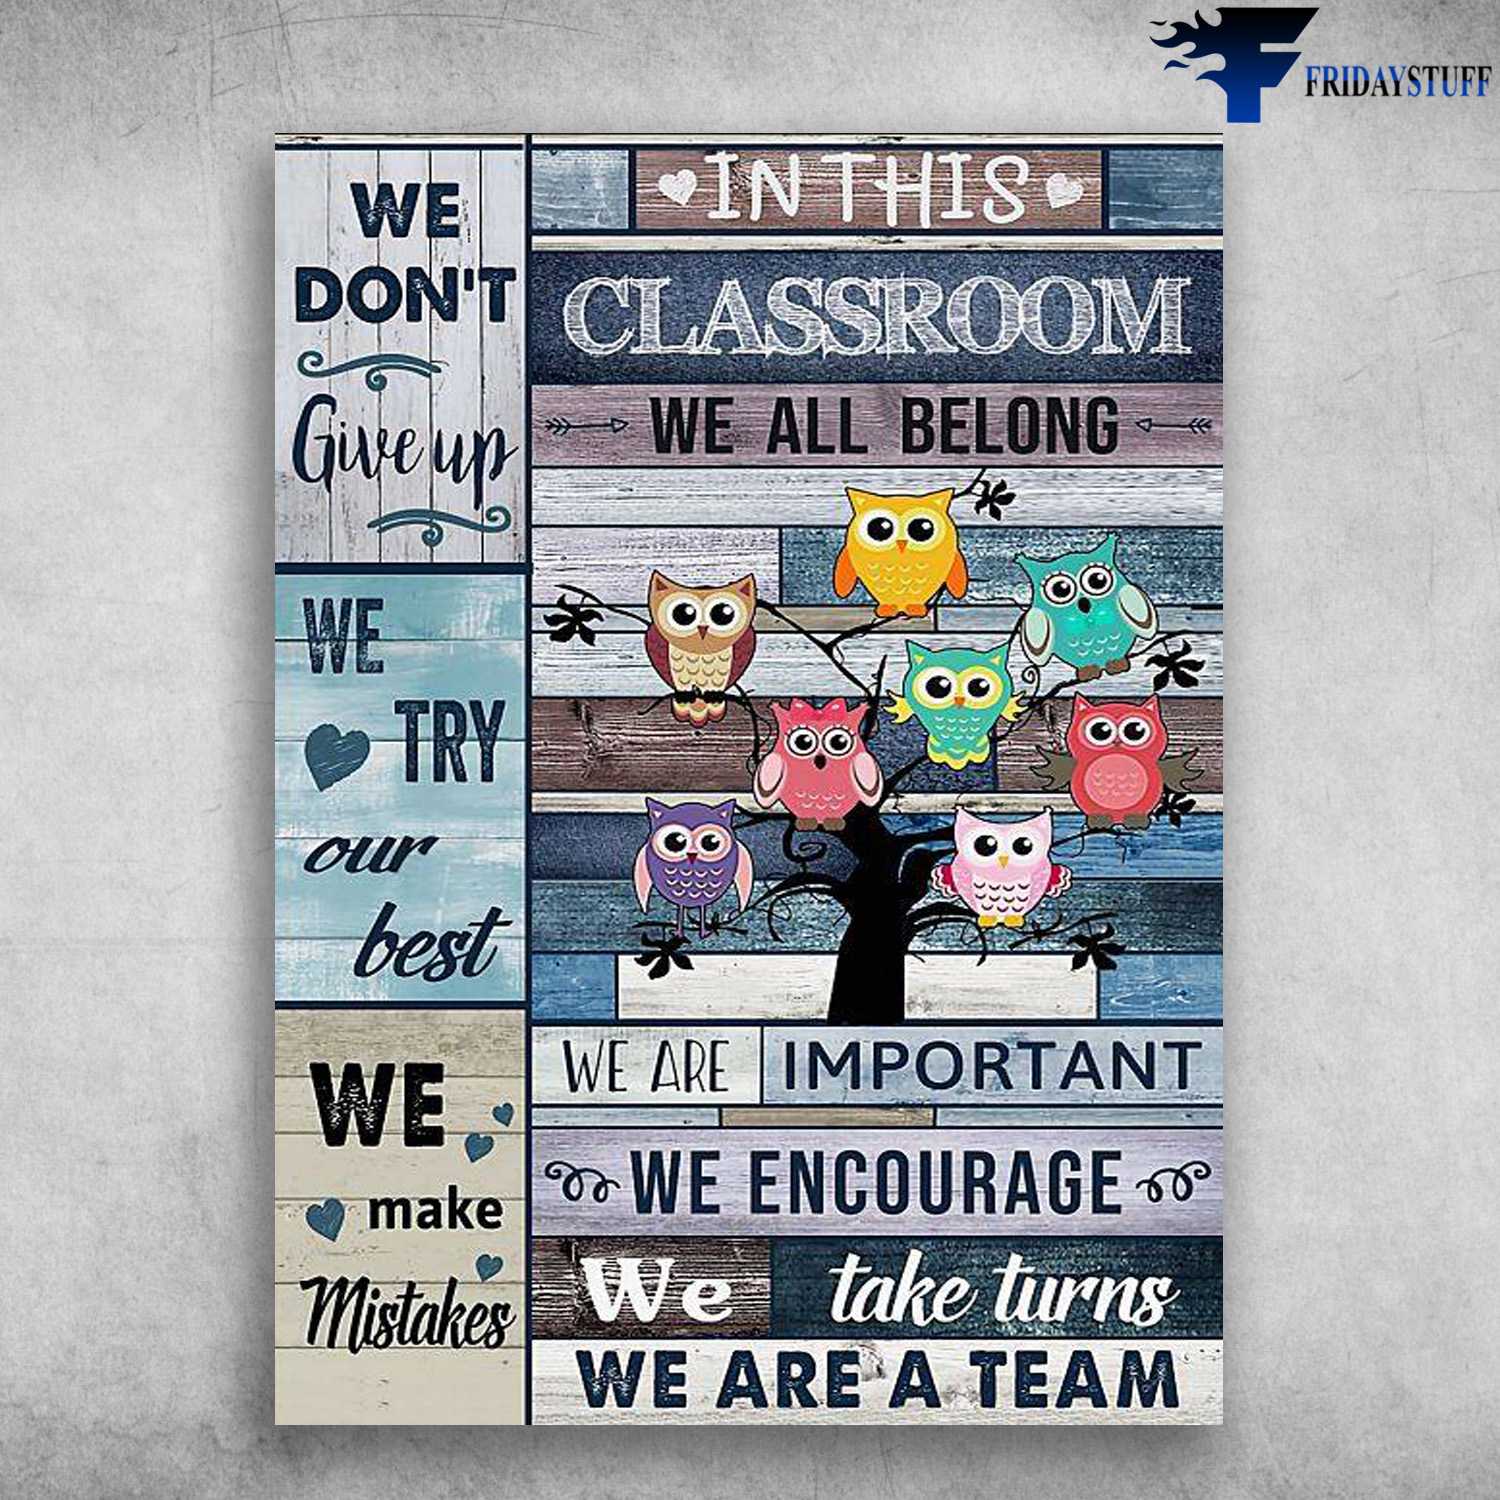 Classroom Poster, Owl Classroom, In This Classroom, We All Belong, We Don't Give Up, We Try Our Best, We Make Mistakes, We Are important